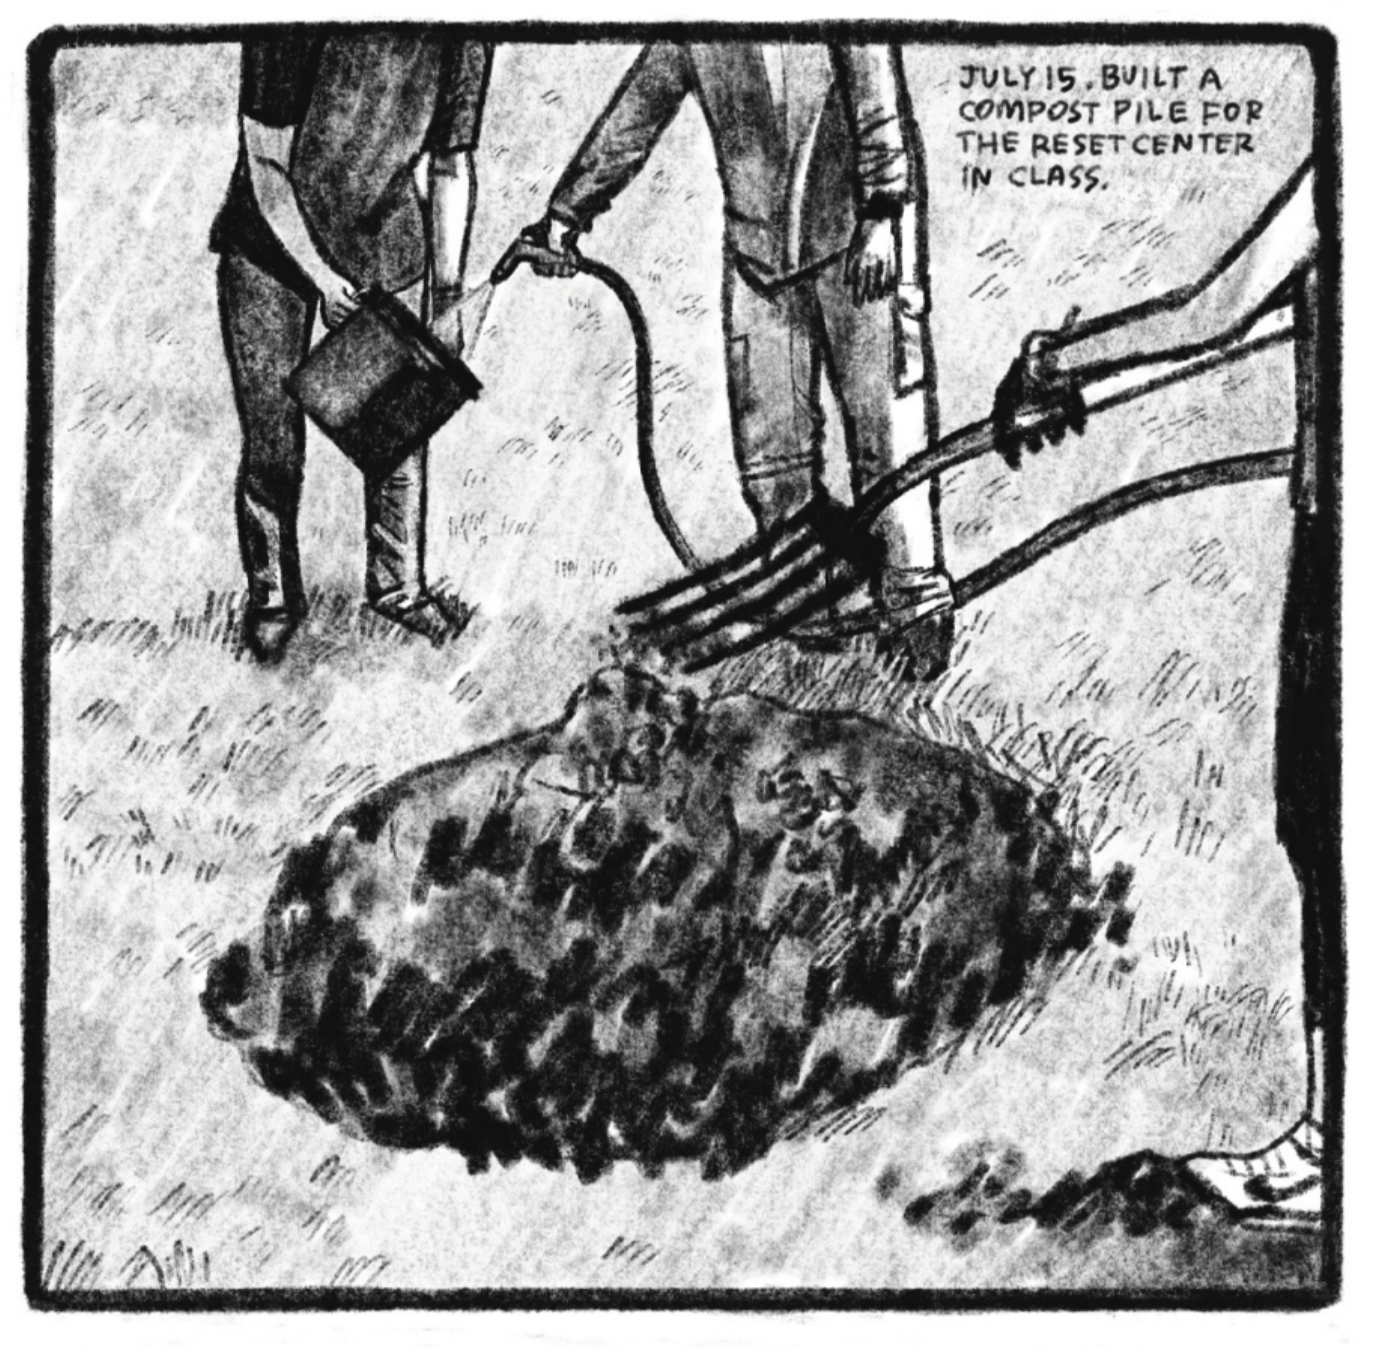 2. Three people, only visible from the shoulders down, stand around a large compost pile. They are outside, on a plain of grass. One of them holds a bucket, which another pours water into from a hose. The third person, to the right and closest to the reader, holds a pitchfork close to the pile. They are all wearing casual clothes. â€œJuly 15. Built a compost pile for the reset center in class.â€